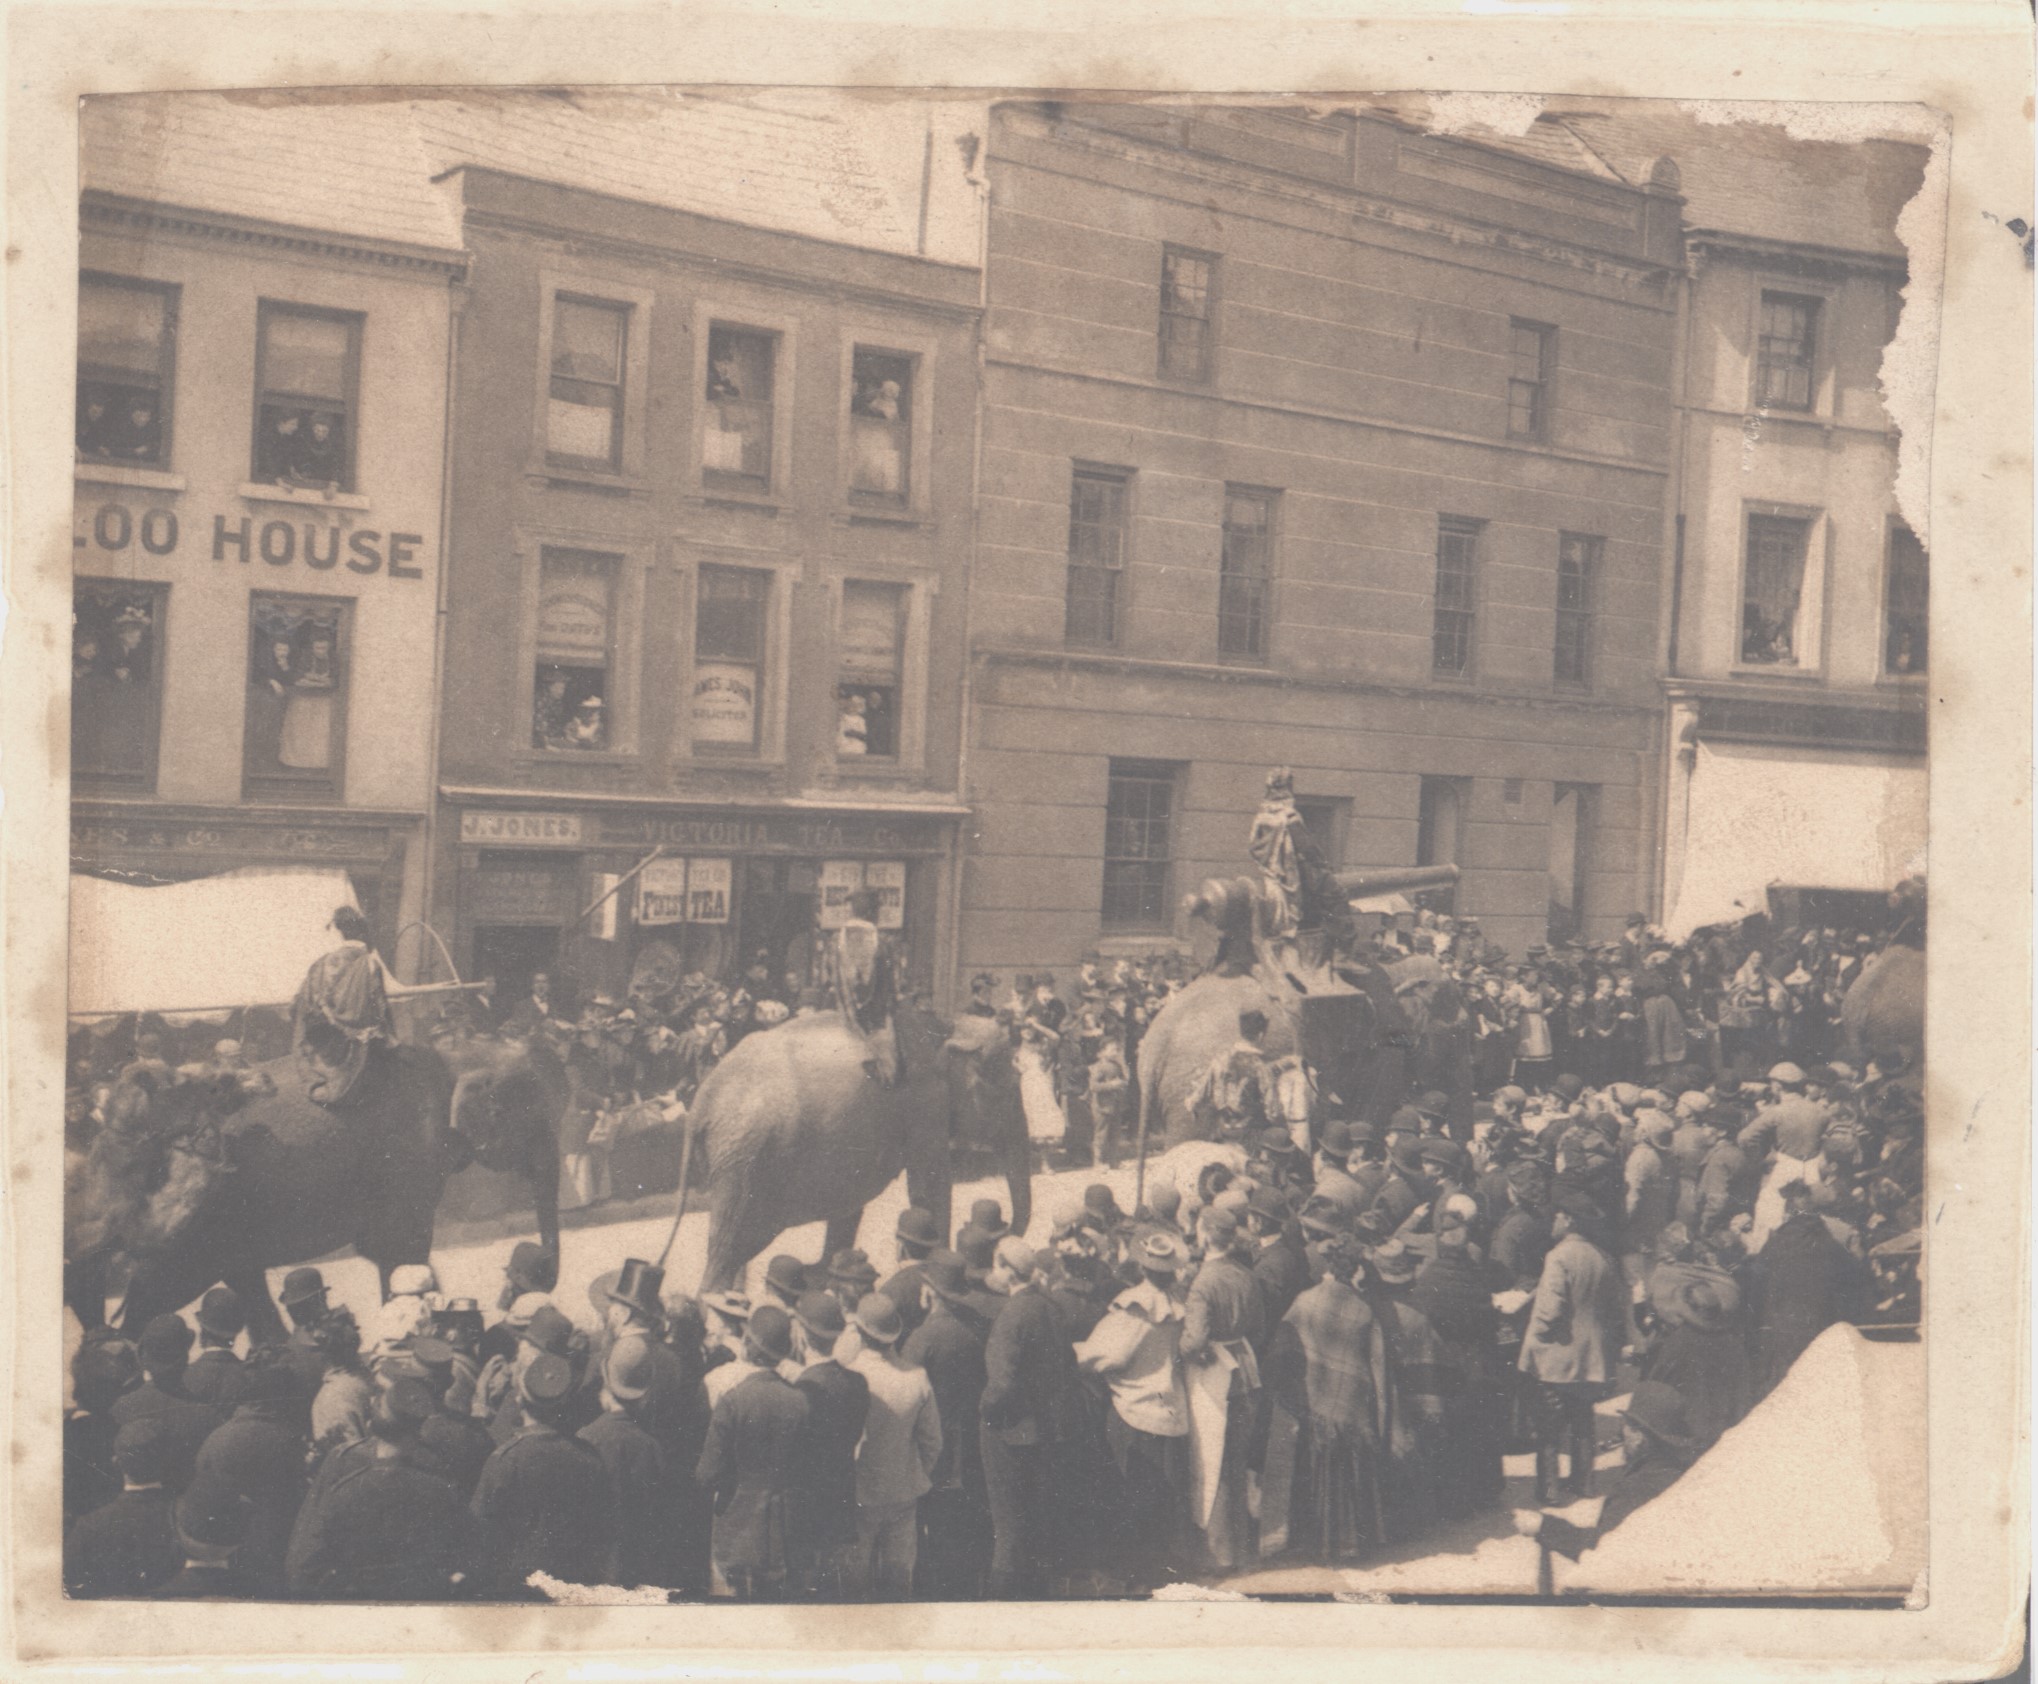 Sepia photograph of a procession of elephants walking down a street in Carmarthen. One has a cannon strapped to its back, a crowd looks on in awe.